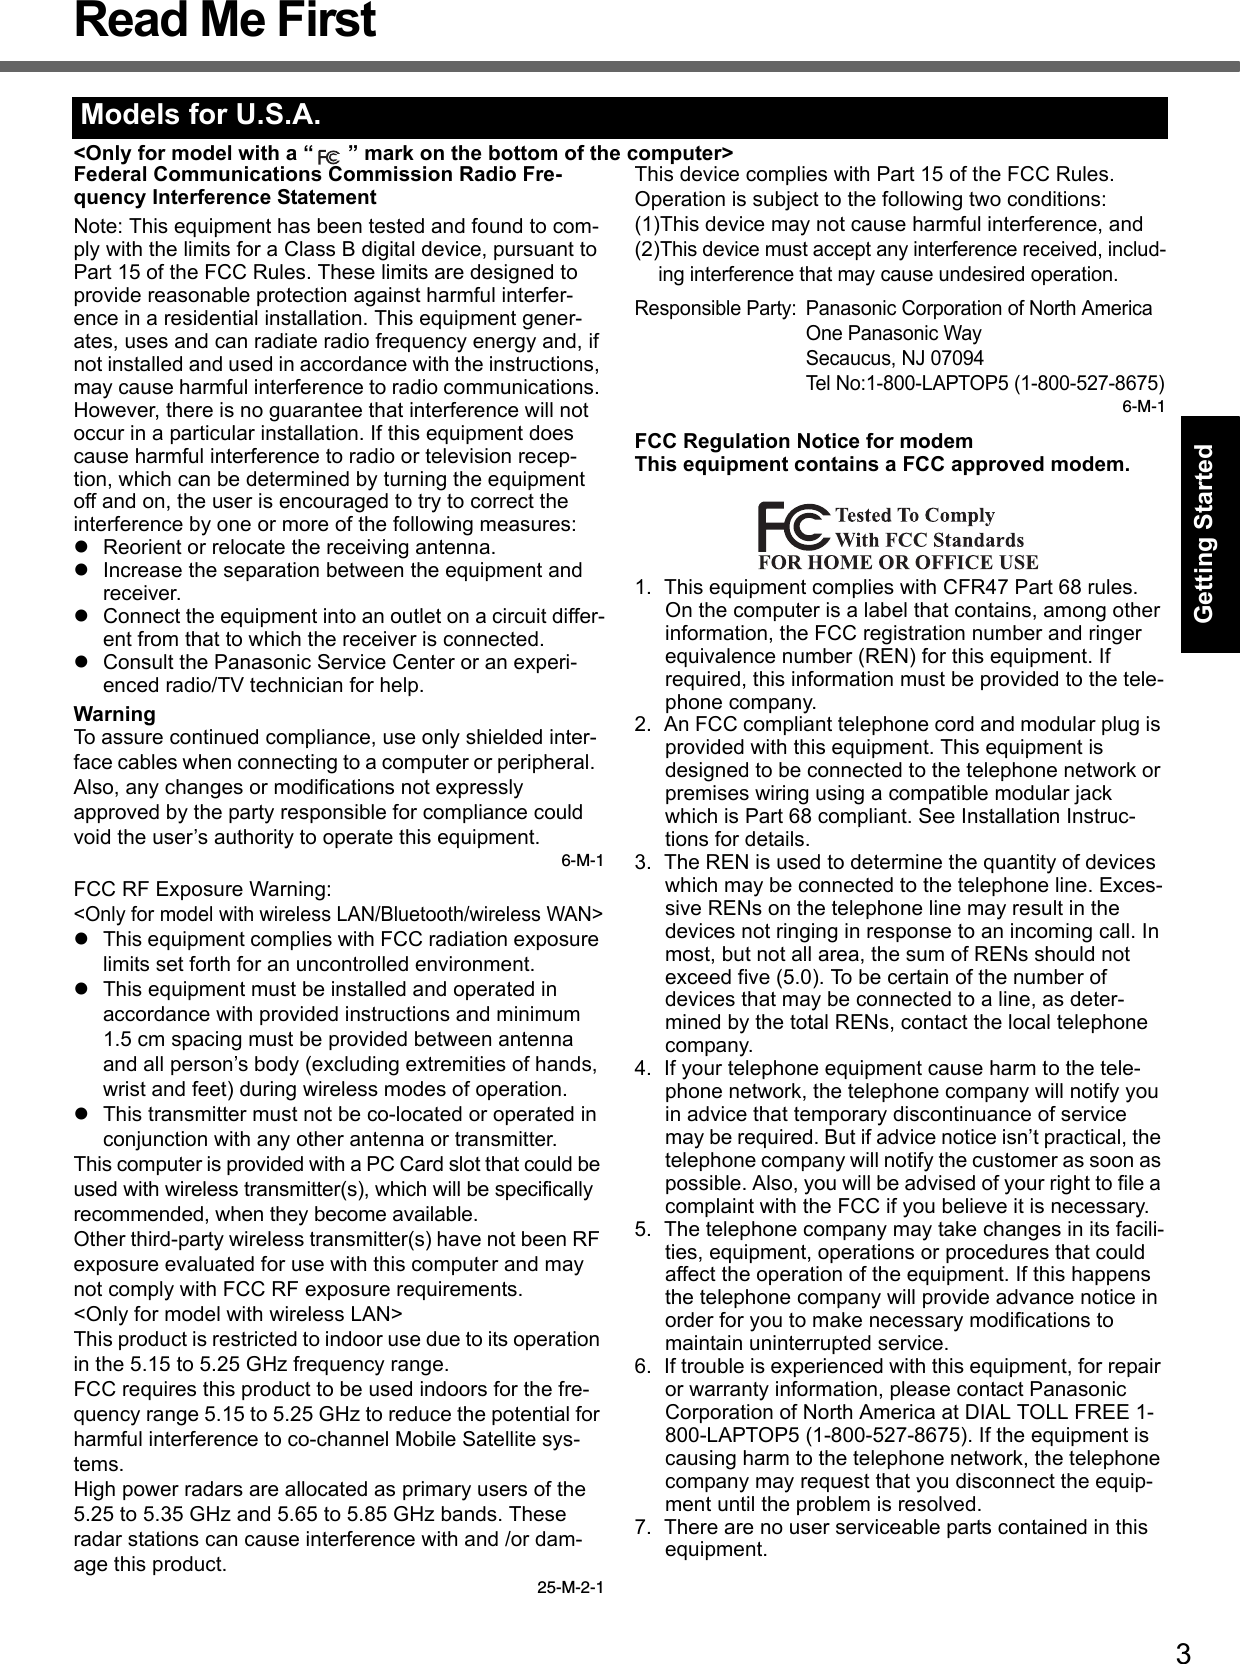 3Getting StartedUseful InformationTroubleshootingAppendixRead Me First&lt;Only for model with a “ ” mark on the bottom of the computer&gt;Federal Communications Commission Radio Fre-quency Interference StatementNote: This equipment has been tested and found to com-ply with the limits for a Class B digital device, pursuant to Part 15 of the FCC Rules. These limits are designed to provide reasonable protection against harmful interfer-ence in a residential installation. This equipment gener-ates, uses and can radiate radio frequency energy and, if not installed and used in accordance with the instructions, may cause harmful interference to radio communications. However, there is no guarantee that interference will not occur in a particular installation. If this equipment does cause harmful interference to radio or television recep-tion, which can be determined by turning the equipment off and on, the user is encouraged to try to correct the interference by one or more of the following measures:Reorient or relocate the receiving antenna.Increase the separation between the equipment and receiver.Connect the equipment into an outlet on a circuit differ-ent from that to which the receiver is connected.Consult the Panasonic Service Center or an experi-enced radio/TV technician for help.WarningTo assure continued compliance, use only shielded inter-face cables when connecting to a computer or peripheral.  Also, any changes or modifications not expressly approved by the party responsible for compliance could void the user’s authority to operate this equipment.6-M-1FCC RF Exposure Warning:&lt;Only for model with wireless LAN/Bluetooth/wireless WAN&gt;This equipment complies with FCC radiation exposure limits set forth for an uncontrolled environment.This equipment must be installed and operated in accordance with provided instructions and minimum 1.5 cm spacing must be provided between antenna and all person’s body (excluding extremities of hands, wrist and feet) during wireless modes of operation.This transmitter must not be co-located or operated in conjunction with any other antenna or transmitter.This computer is provided with a PC Card slot that could be used with wireless transmitter(s), which will be specifically recommended, when they become available.Other third-party wireless transmitter(s) have not been RF exposure evaluated for use with this computer and may not comply with FCC RF exposure requirements.&lt;Only for model with wireless LAN&gt;This product is restricted to indoor use due to its operation in the 5.15 to 5.25 GHz frequency range.FCC requires this product to be used indoors for the fre-quency range 5.15 to 5.25 GHz to reduce the potential for harmful interference to co-channel Mobile Satellite sys-tems.High power radars are allocated as primary users of the 5.25 to 5.35 GHz and 5.65 to 5.85 GHz bands. These radar stations can cause interference with and /or dam-age this product.25-M-2-1This device complies with Part 15 of the FCC Rules.  Operation is subject to the following two conditions:(1)This device may not cause harmful interference, and(2)This device must accept any interference received, includ-ing interference that may cause undesired operation.Responsible Party: Panasonic Corporation of North AmericaOne Panasonic WaySecaucus, NJ 07094Tel No:1-800-LAPTOP5 (1-800-527-8675)6-M-1FCC Regulation Notice for modemThis equipment contains a FCC approved modem.1. This equipment complies with CFR47 Part 68 rules. On the computer is a label that contains, among other information, the FCC registration number and ringer equivalence number (REN) for this equipment. If required, this information must be provided to the tele-phone company.2. An FCC compliant telephone cord and modular plug is provided with this equipment. This equipment is designed to be connected to the telephone network or premises wiring using a compatible modular jack which is Part 68 compliant. See Installation Instruc-tions for details.3. The REN is used to determine the quantity of devices which may be connected to the telephone line. Exces-sive RENs on the telephone line may result in the devices not ringing in response to an incoming call. In most, but not all area, the sum of RENs should not exceed five (5.0). To be certain of the number of devices that may be connected to a line, as deter-mined by the total RENs, contact the local telephone company.4. If your telephone equipment cause harm to the tele-phone network, the telephone company will notify you in advice that temporary discontinuance of service may be required. But if advice notice isn’t practical, the telephone company will notify the customer as soon as possible. Also, you will be advised of your right to file a complaint with the FCC if you believe it is necessary.5. The telephone company may take changes in its facili-ties, equipment, operations or procedures that could affect the operation of the equipment. If this happens the telephone company will provide advance notice in order for you to make necessary modifications to maintain uninterrupted service.6. If trouble is experienced with this equipment, for repair or warranty information, please contact Panasonic Corporation of North America at DIAL TOLL FREE 1-800-LAPTOP5 (1-800-527-8675). If the equipment is causing harm to the telephone network, the telephone company may request that you disconnect the equip-ment until the problem is resolved.7. There are no user serviceable parts contained in this equipment.Models for U.S.A.